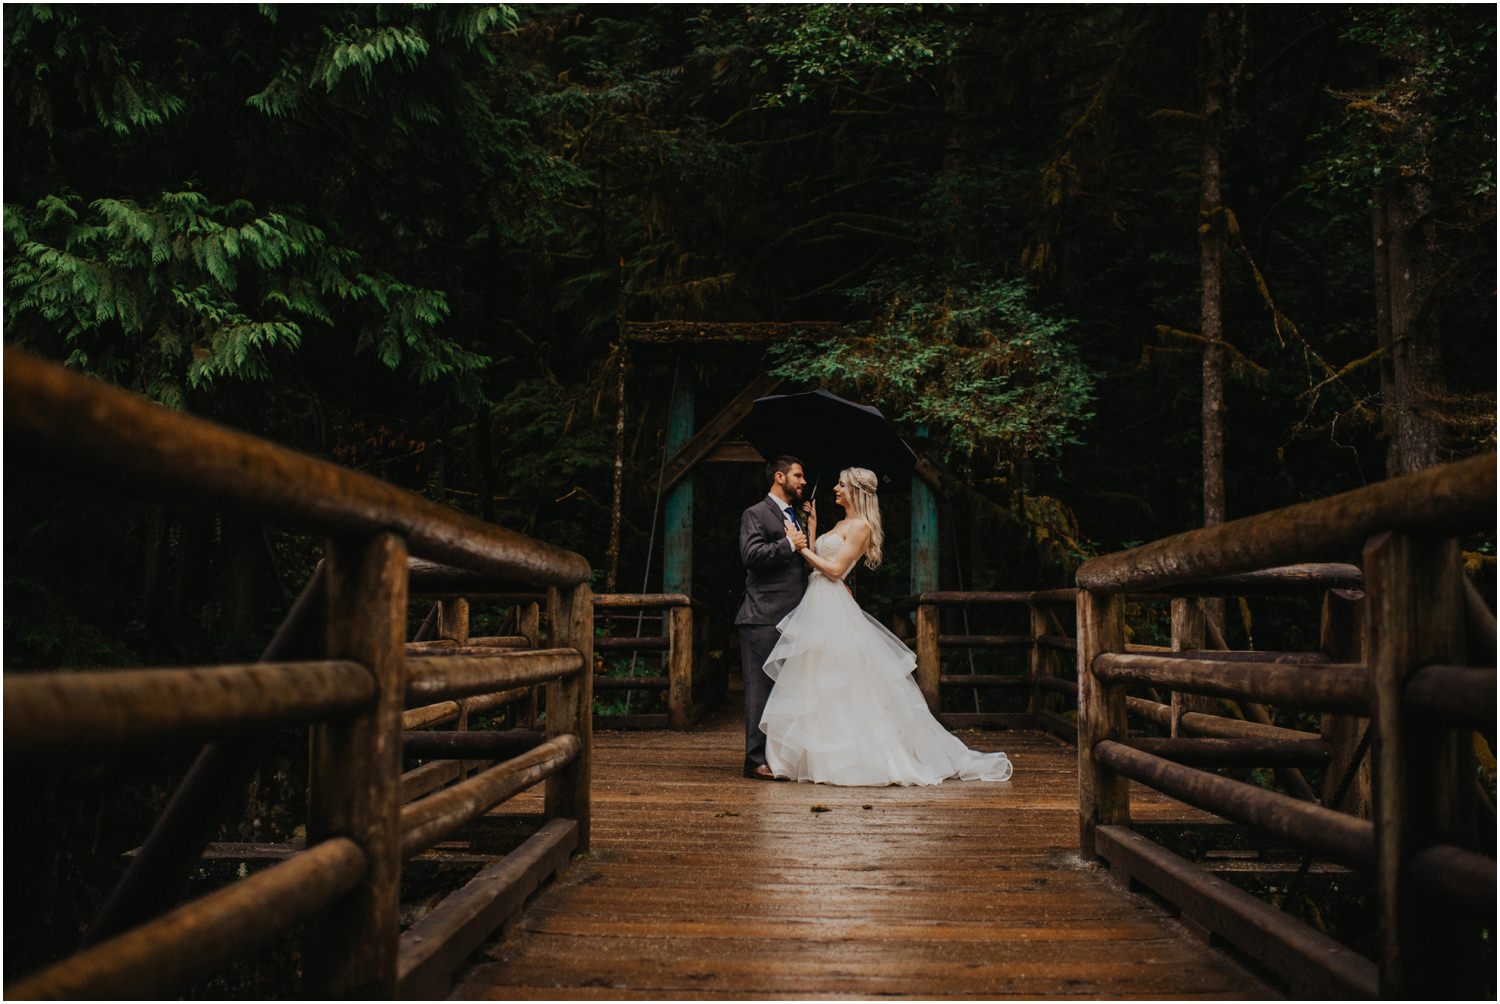 The View on Lonsdale – Vancouver Wedding